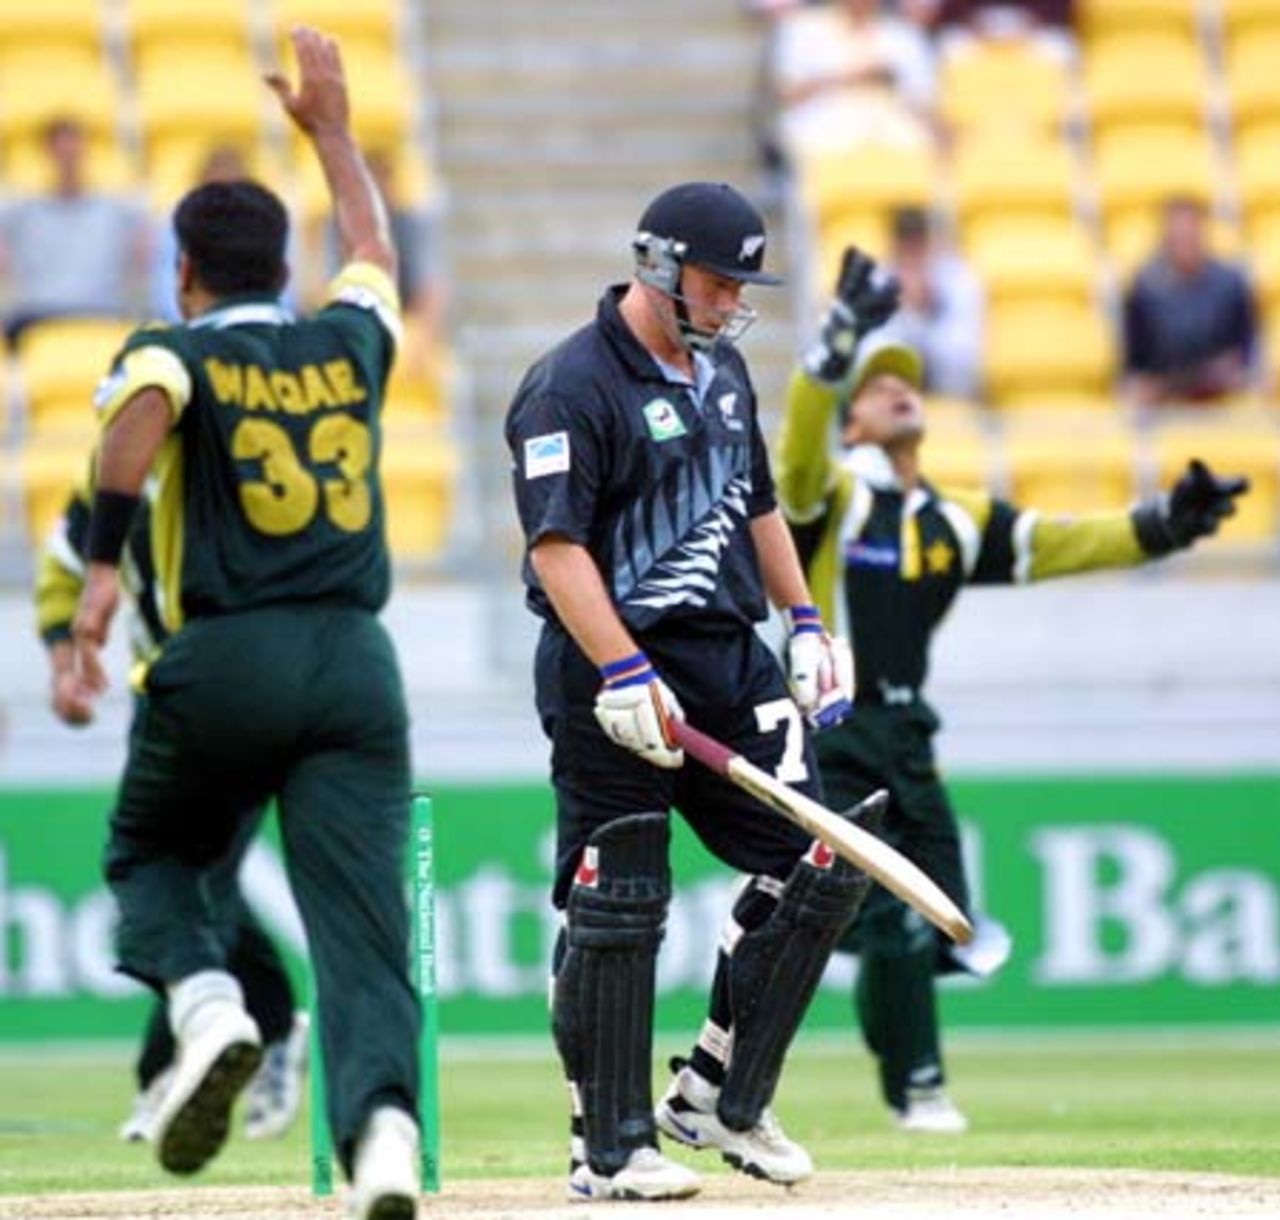 Pakistan opening bowler Waqar Younis charges down the wicket in celebration of dismissing New Zealand batsman Roger Twose caught behind by wicket-keeper Moin Khan (throwing the ball in the air in the background) for one. 3rd One-Day International: New Zealand v Pakistan at WestpacTrust Stadium, Wellington, 22 February 2001.